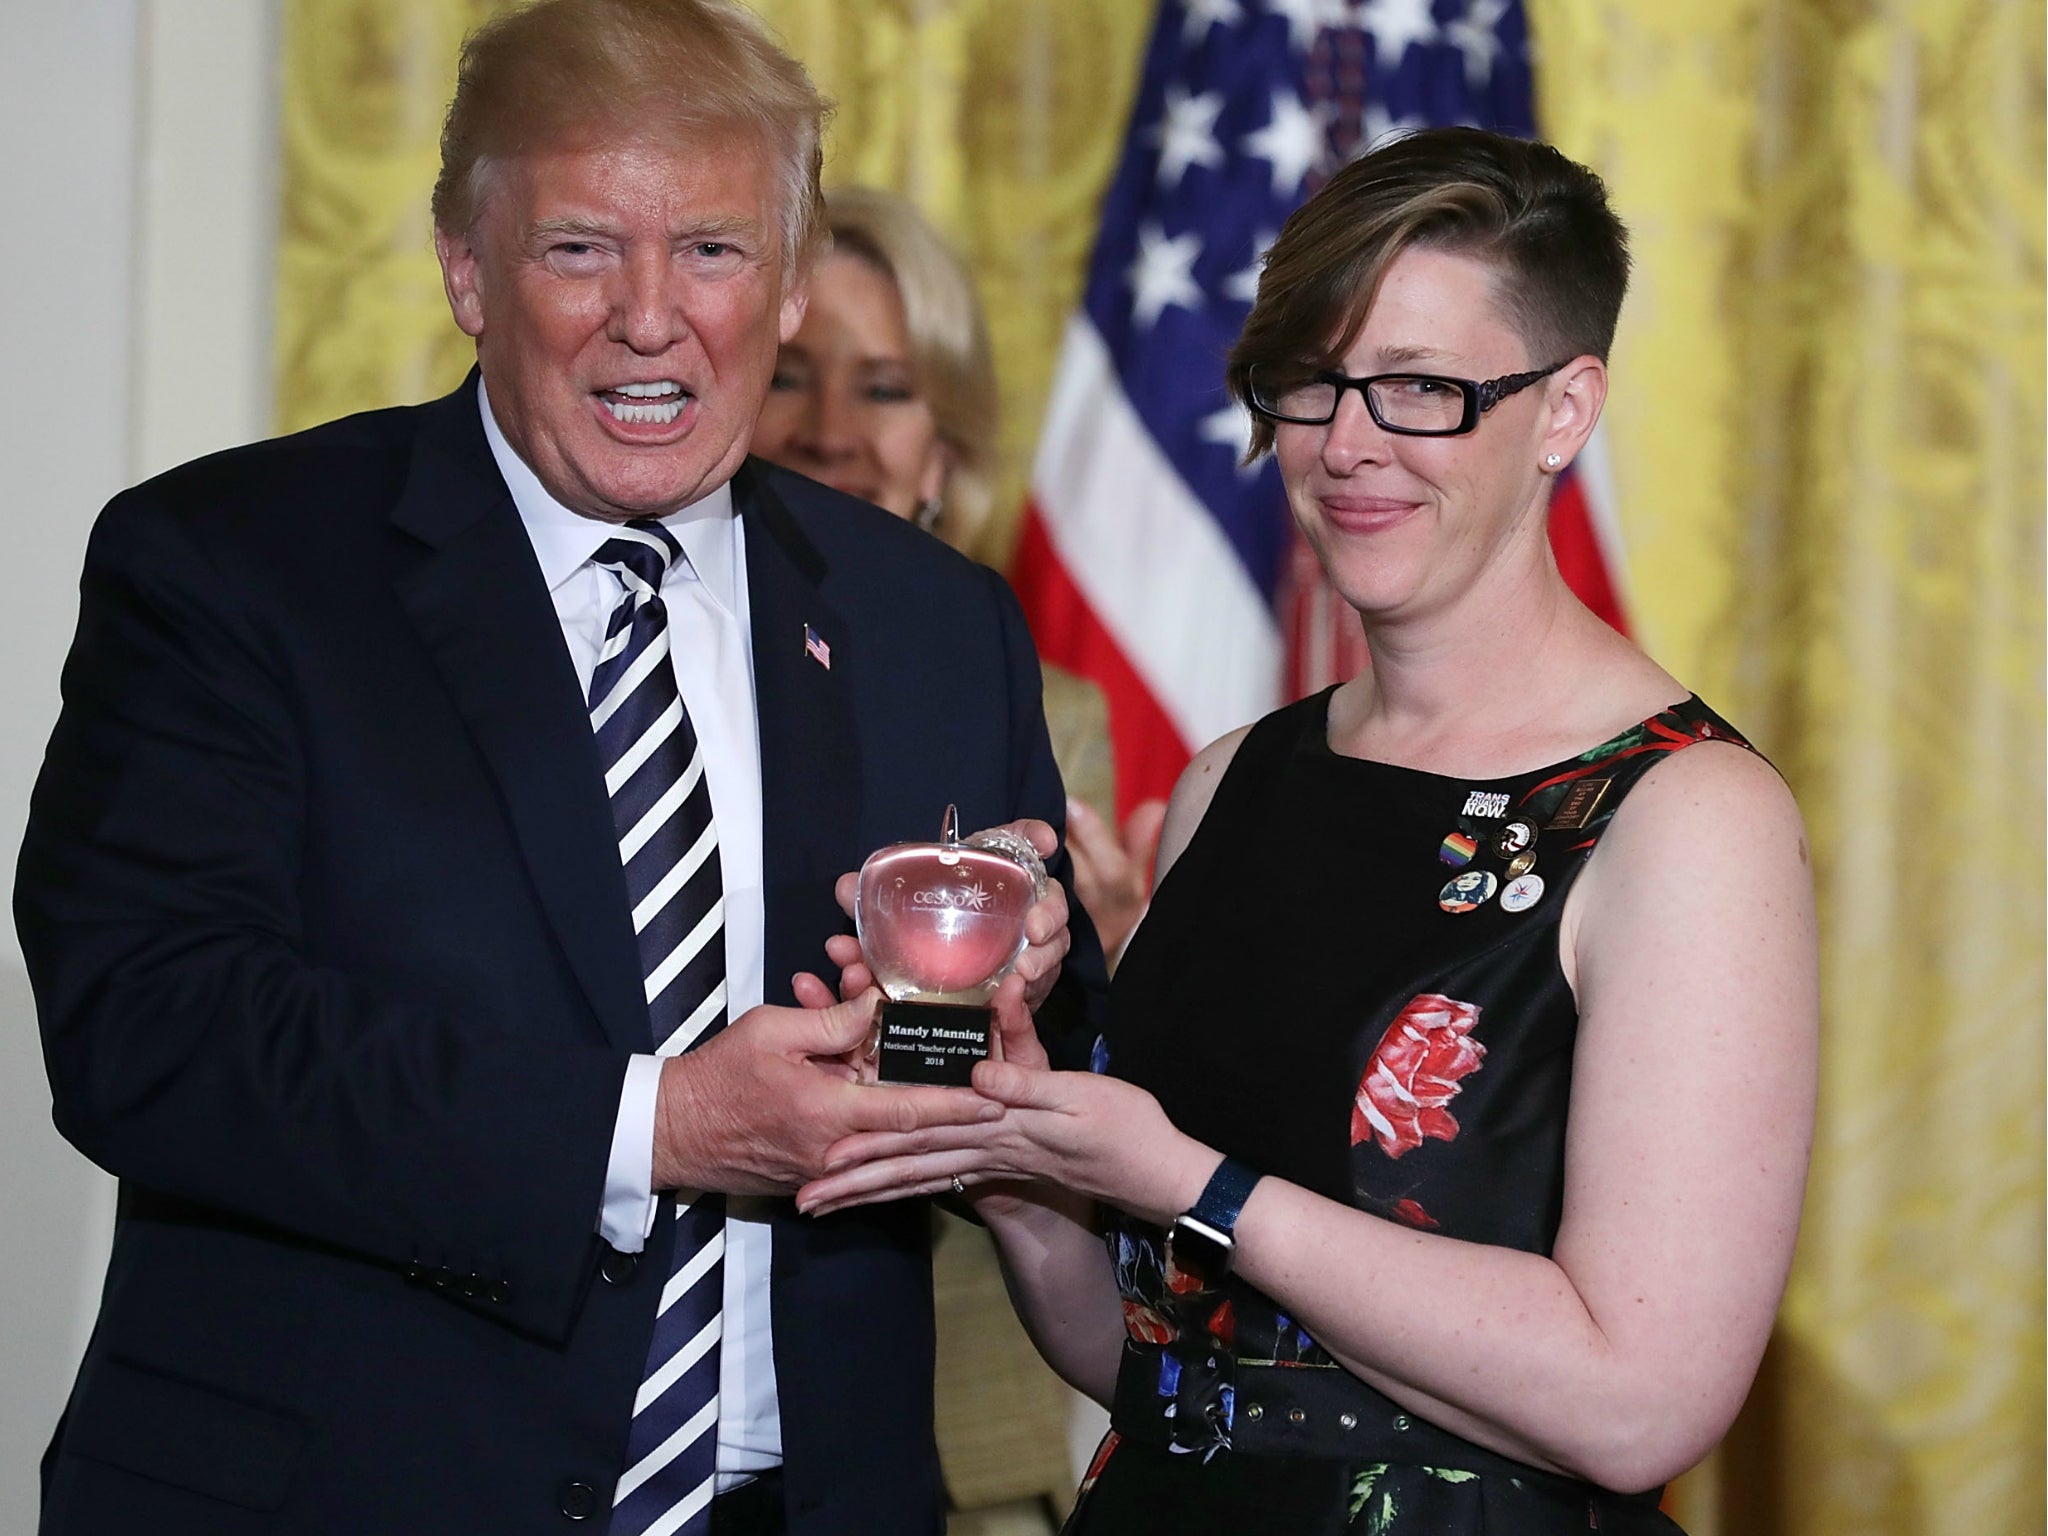 US President Donald Trump gives the National Teacher of the Year trophy to Mandy Manning during a ceremony at the White House 2 May 2018.